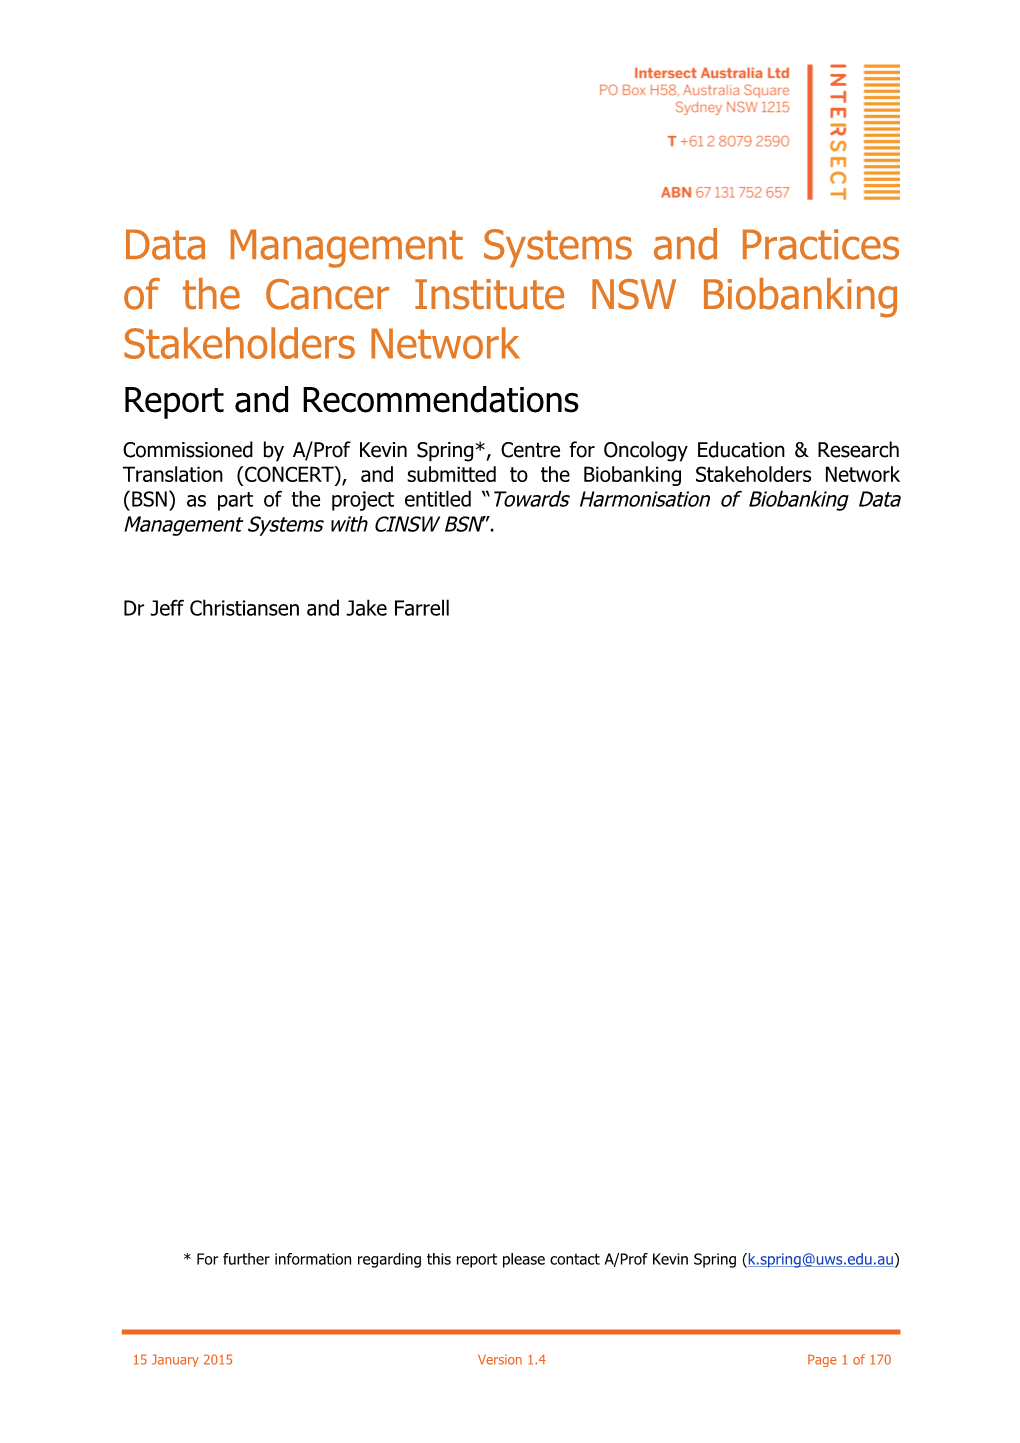 Data Management Systems and Practices of the Cancer Institute NSW Biobanking Stakeholders Network Report and Recommendations